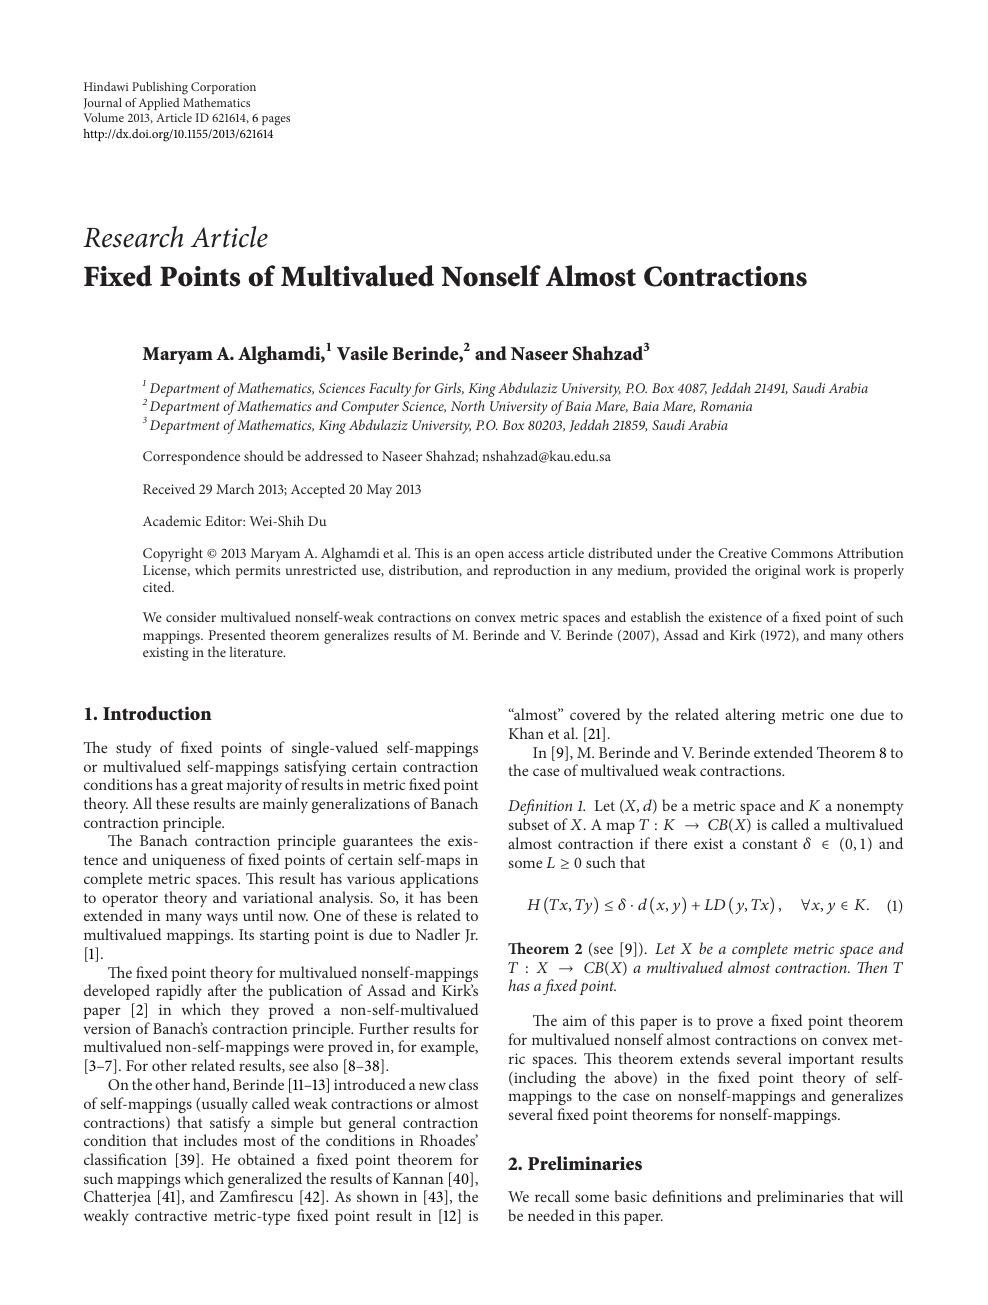 Fixed Points Of Multivalued Nonself Almost Contractions Topic Of Research Paper In Mathematics Download Scholarly Article Pdf And Read For Free On Cyberleninka Open Science Hub